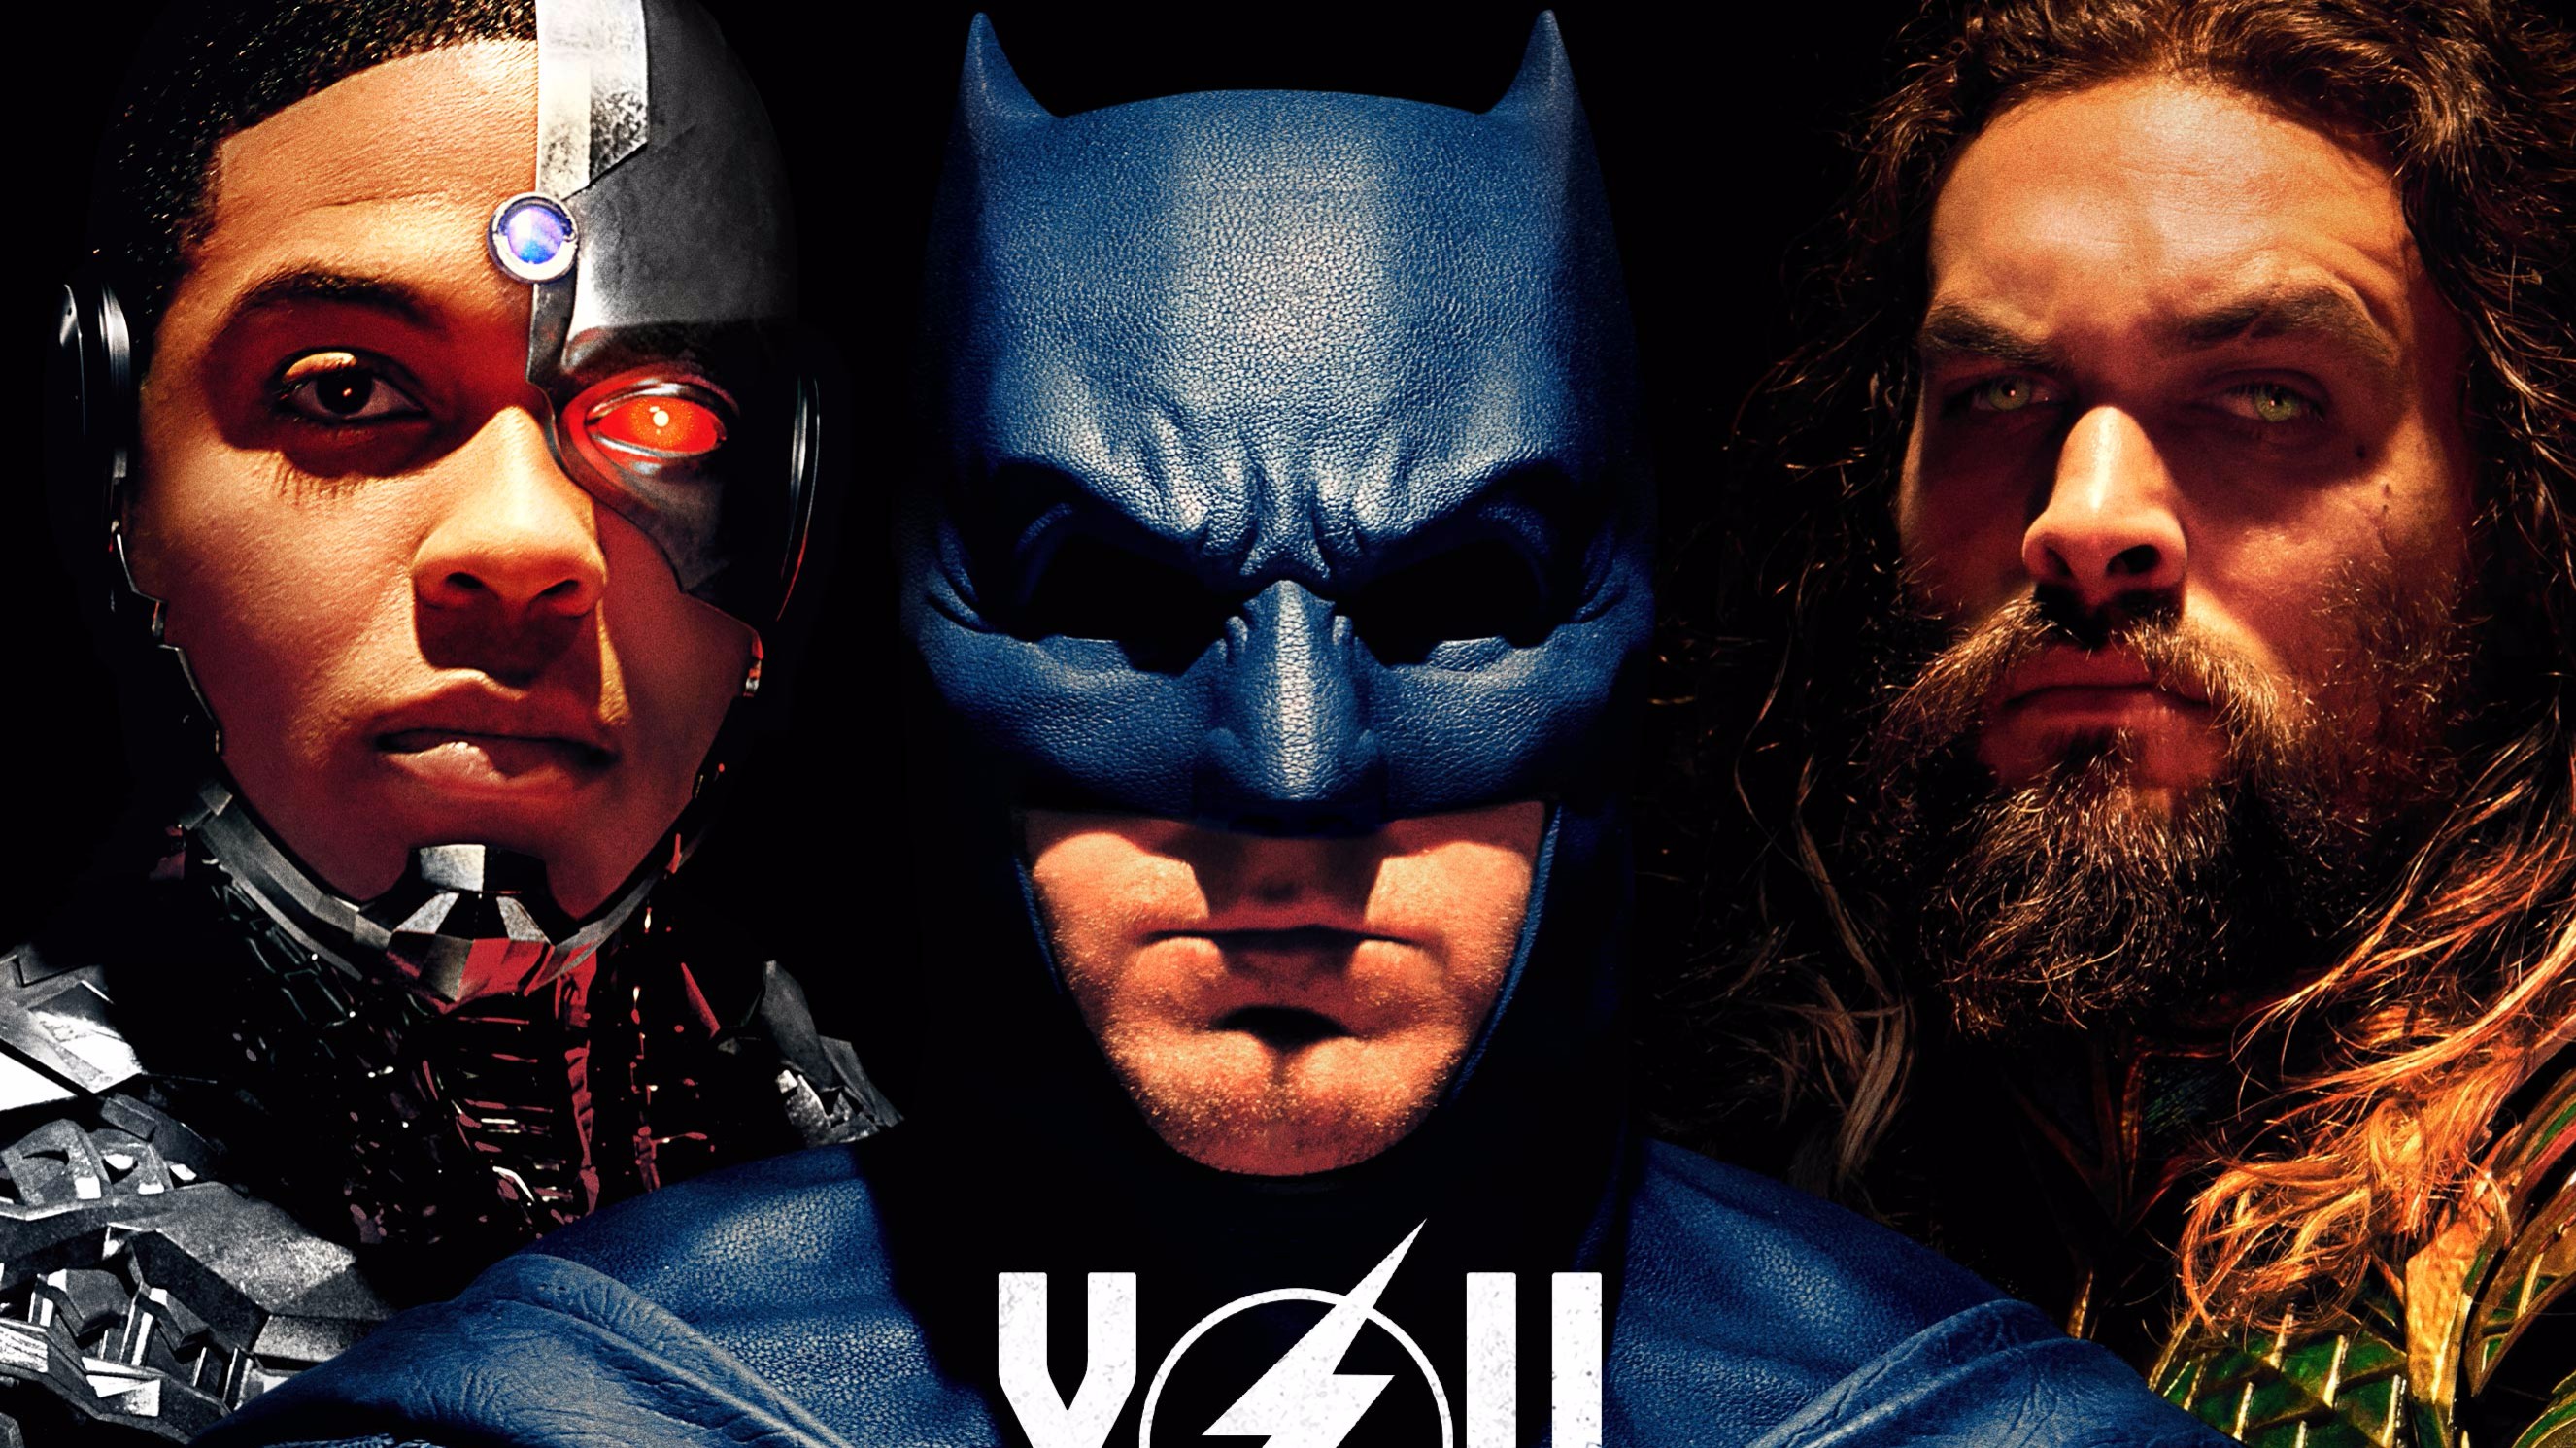 Justice League' Comic Con Poster: You Can't Save The World Alone